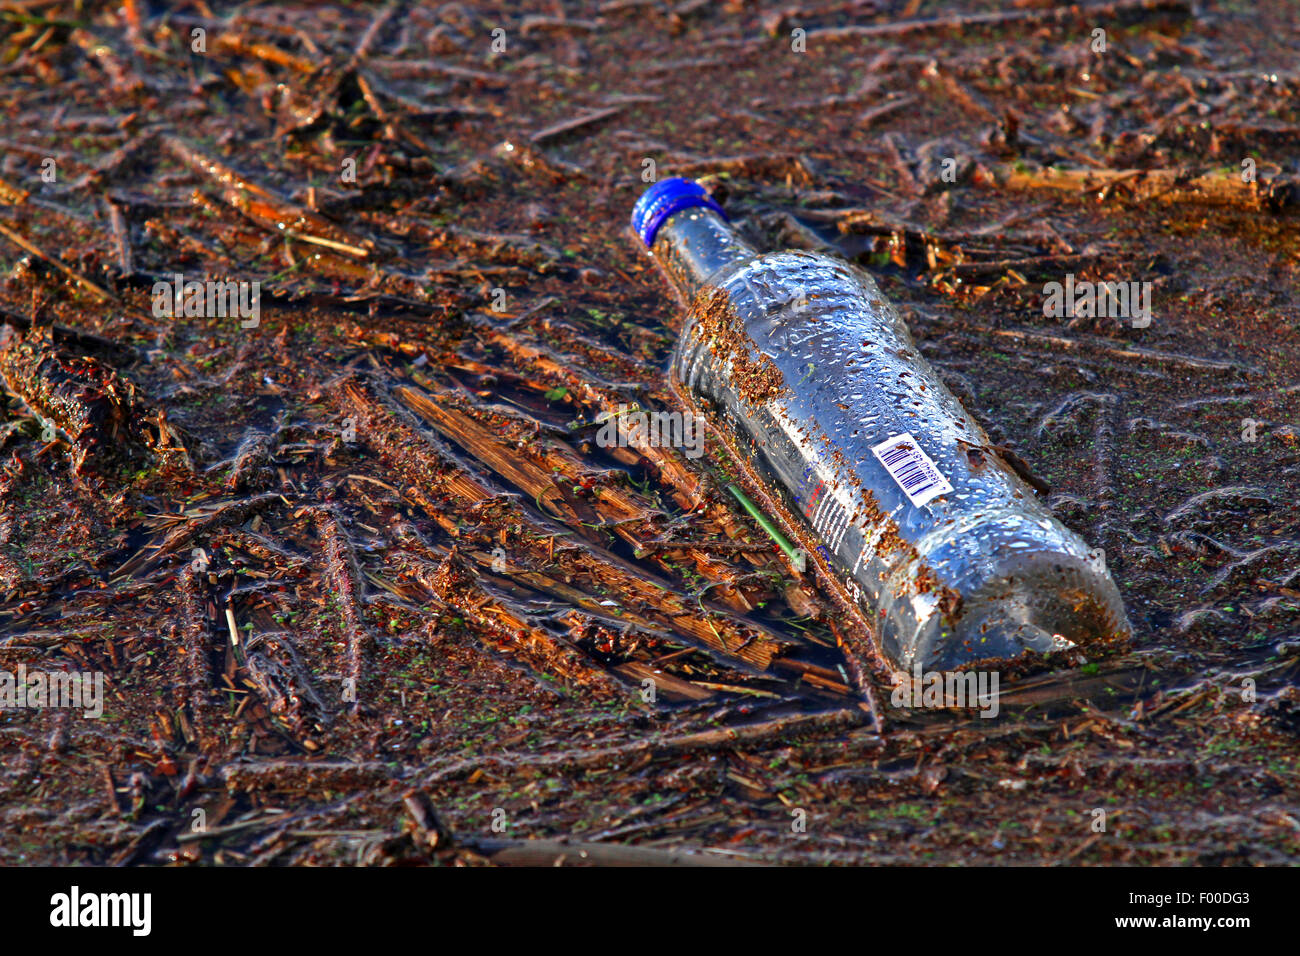 empty glass bottle and flotsam in stretch of water, Germany Stock Photo